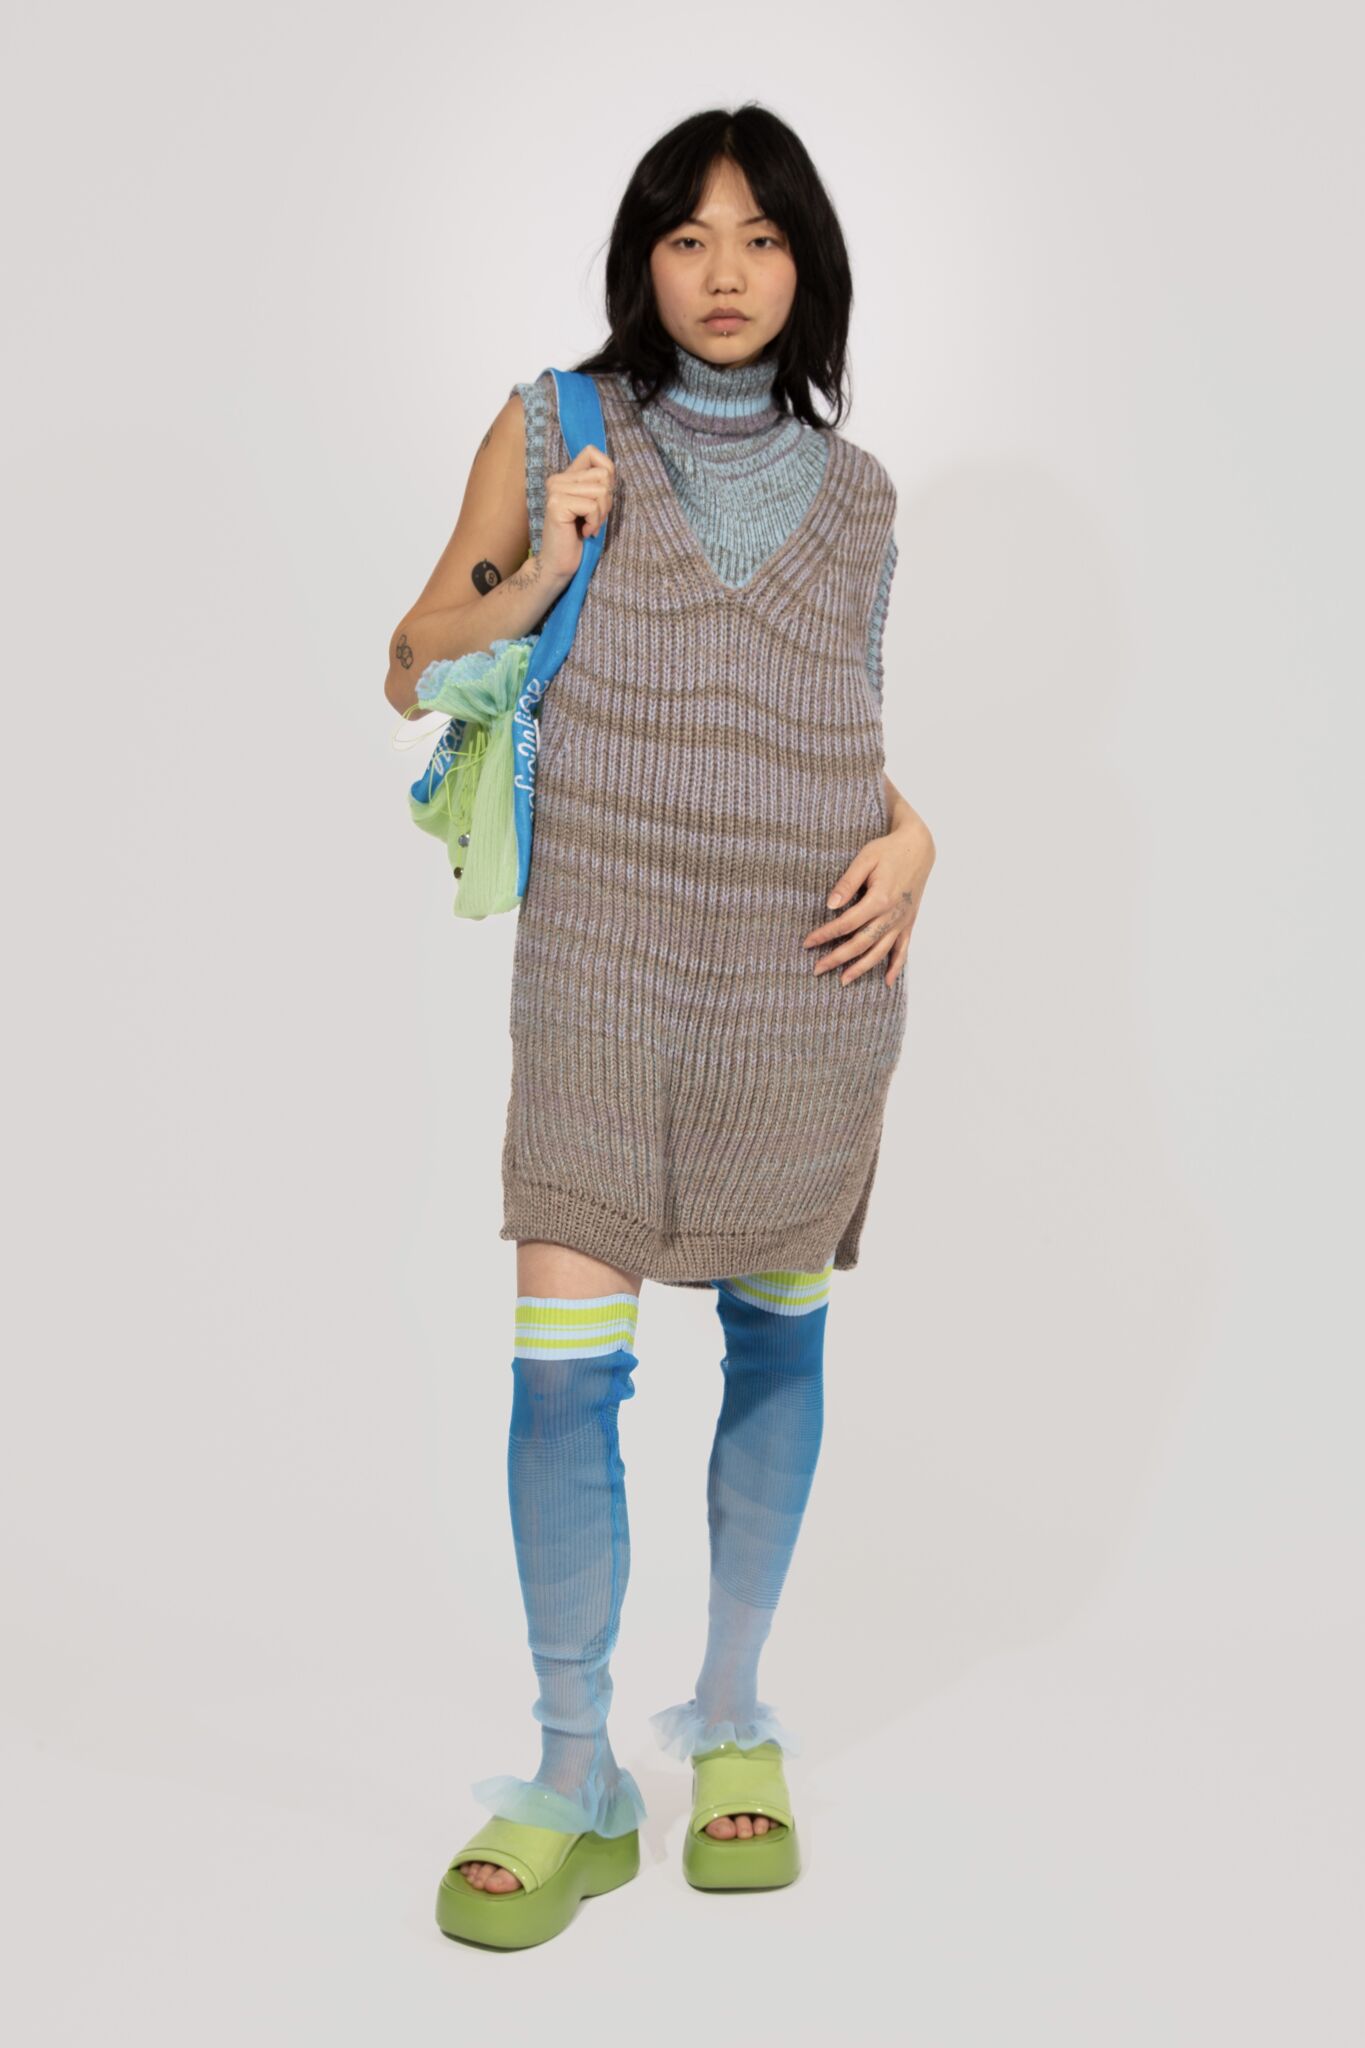 Gradient Frills in blue and lime, knitted, below the knee or the arms